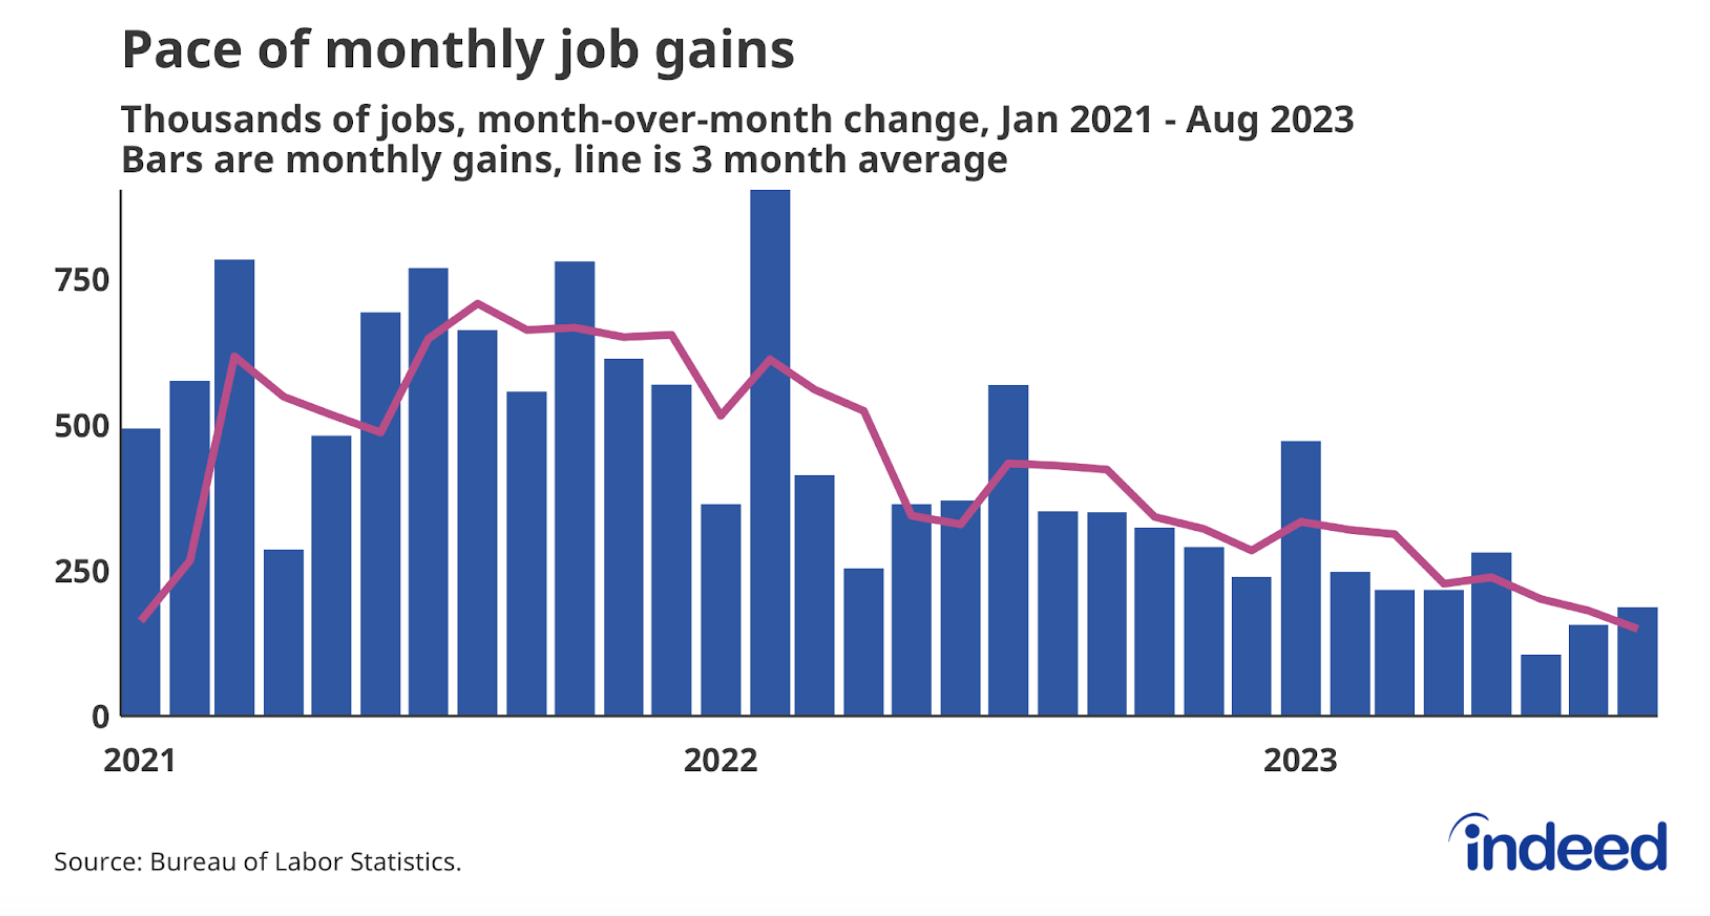 A graph titled “Pace of monthly job gains” shows the month-over-month gain in payroll jobs as bars, and the three-month average as a line. The vertical axis spans from 0 to 750,000 jobs. The graph shows job gains slowing down over the course of 2022 and 2023.